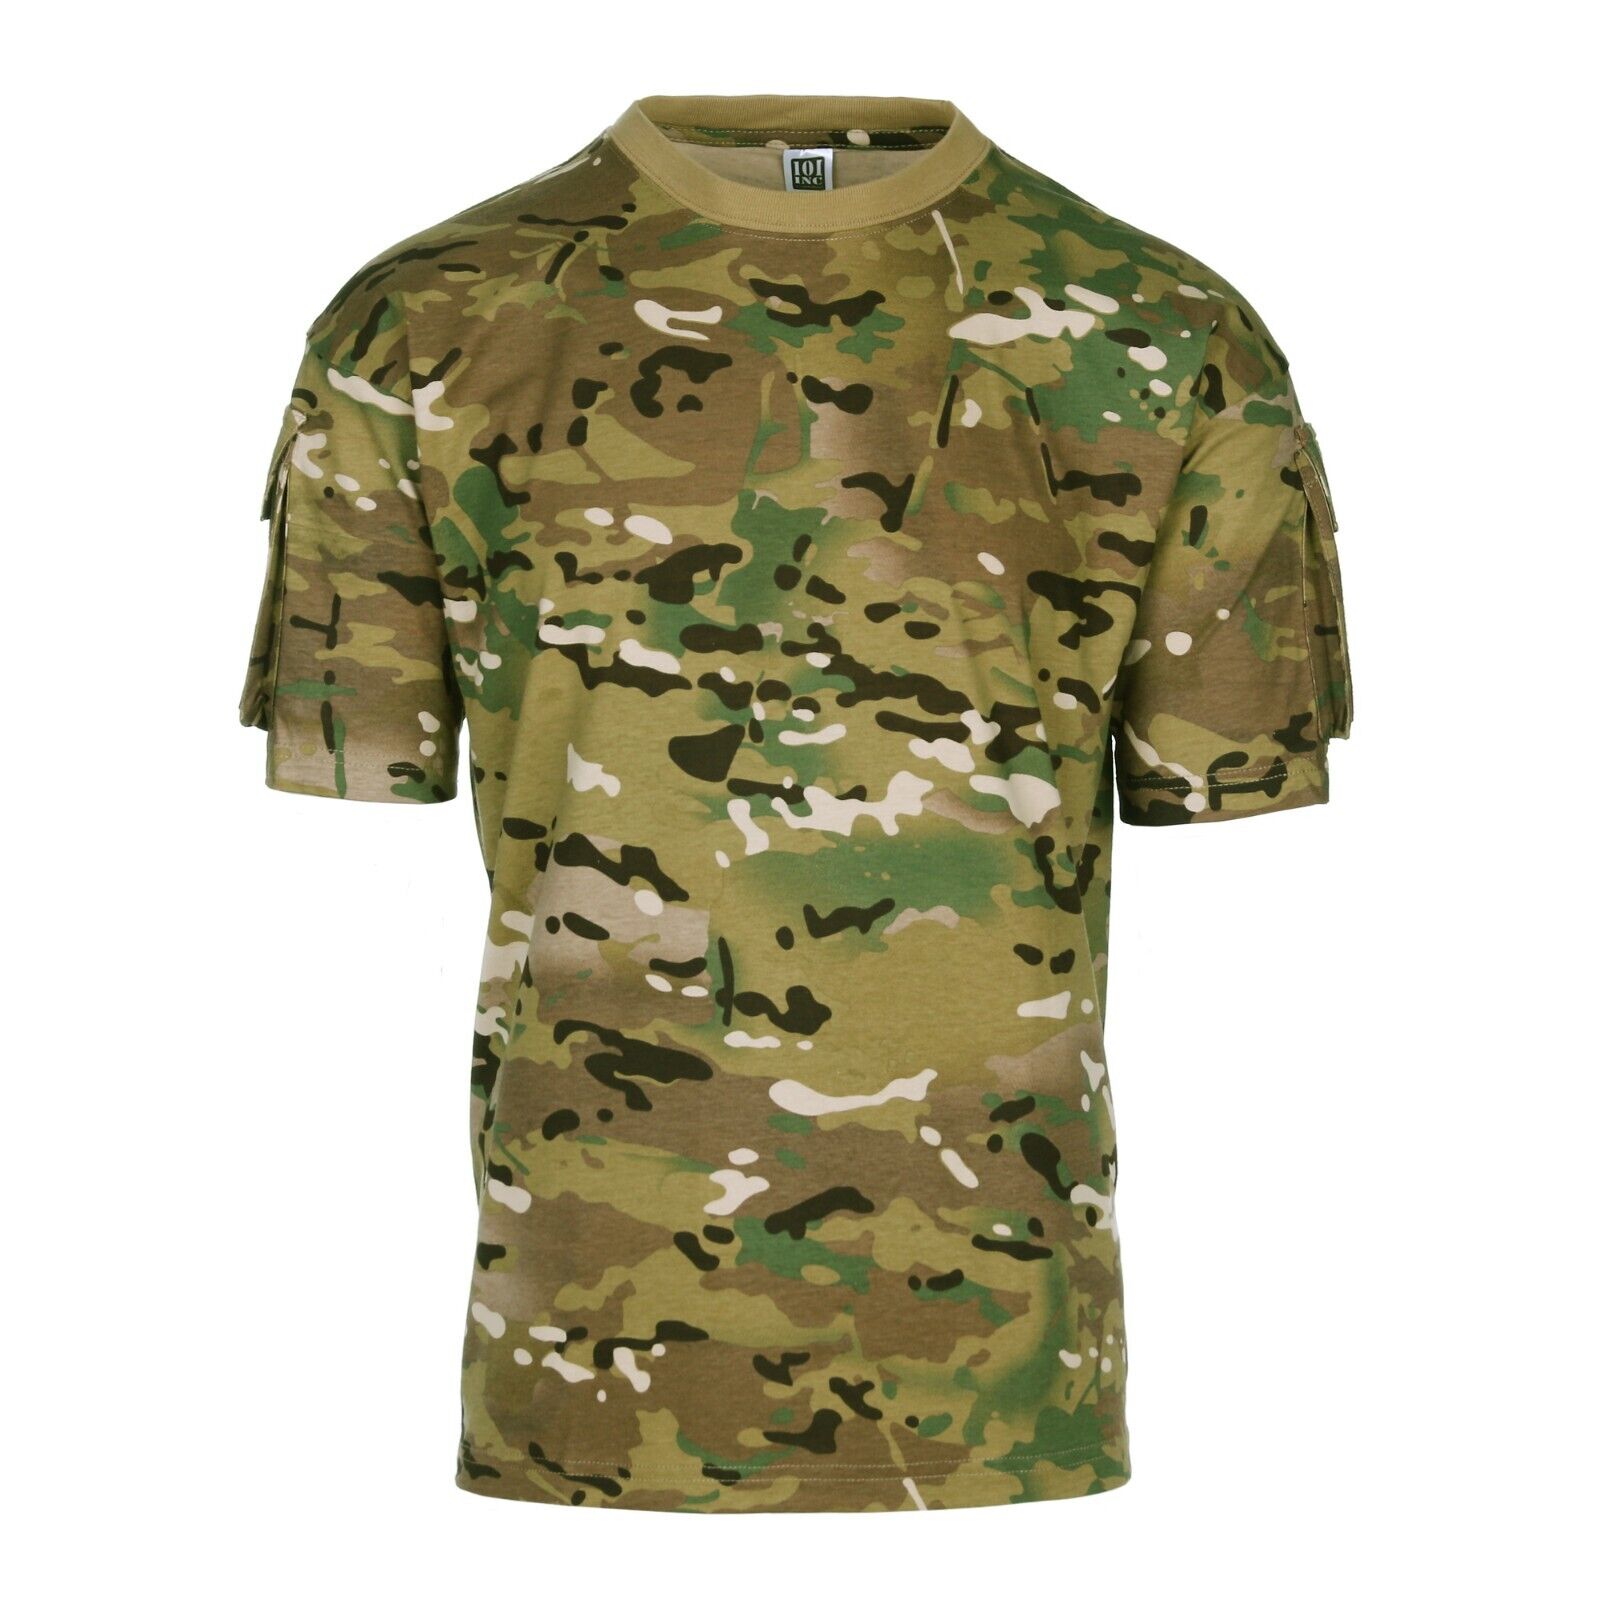 British Army Style MTP Tactical T-shirt Short Sleeve With Arm Pocket MULTICAM